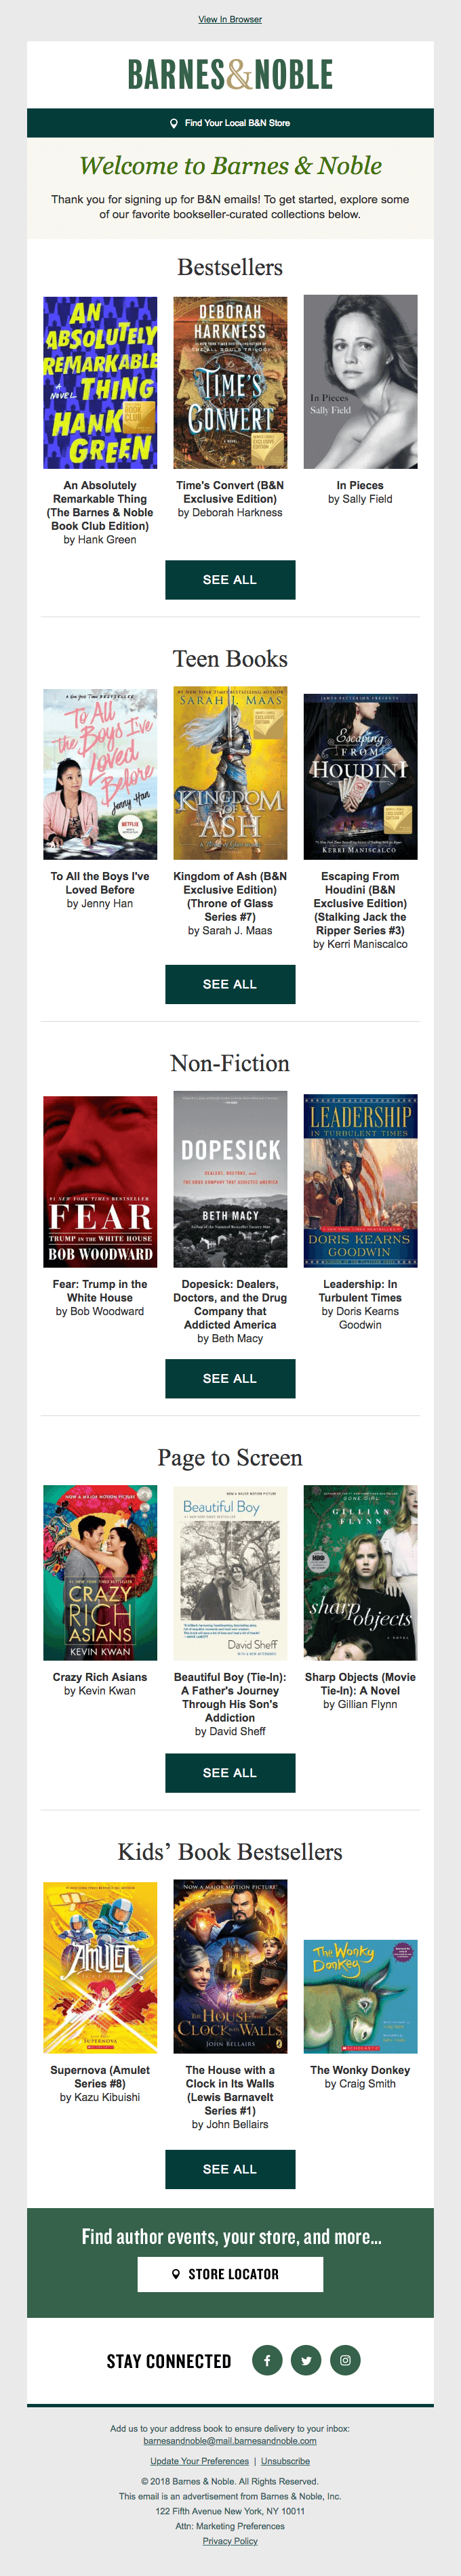 Welcome email from Barnes&Noble with generic product suggestions